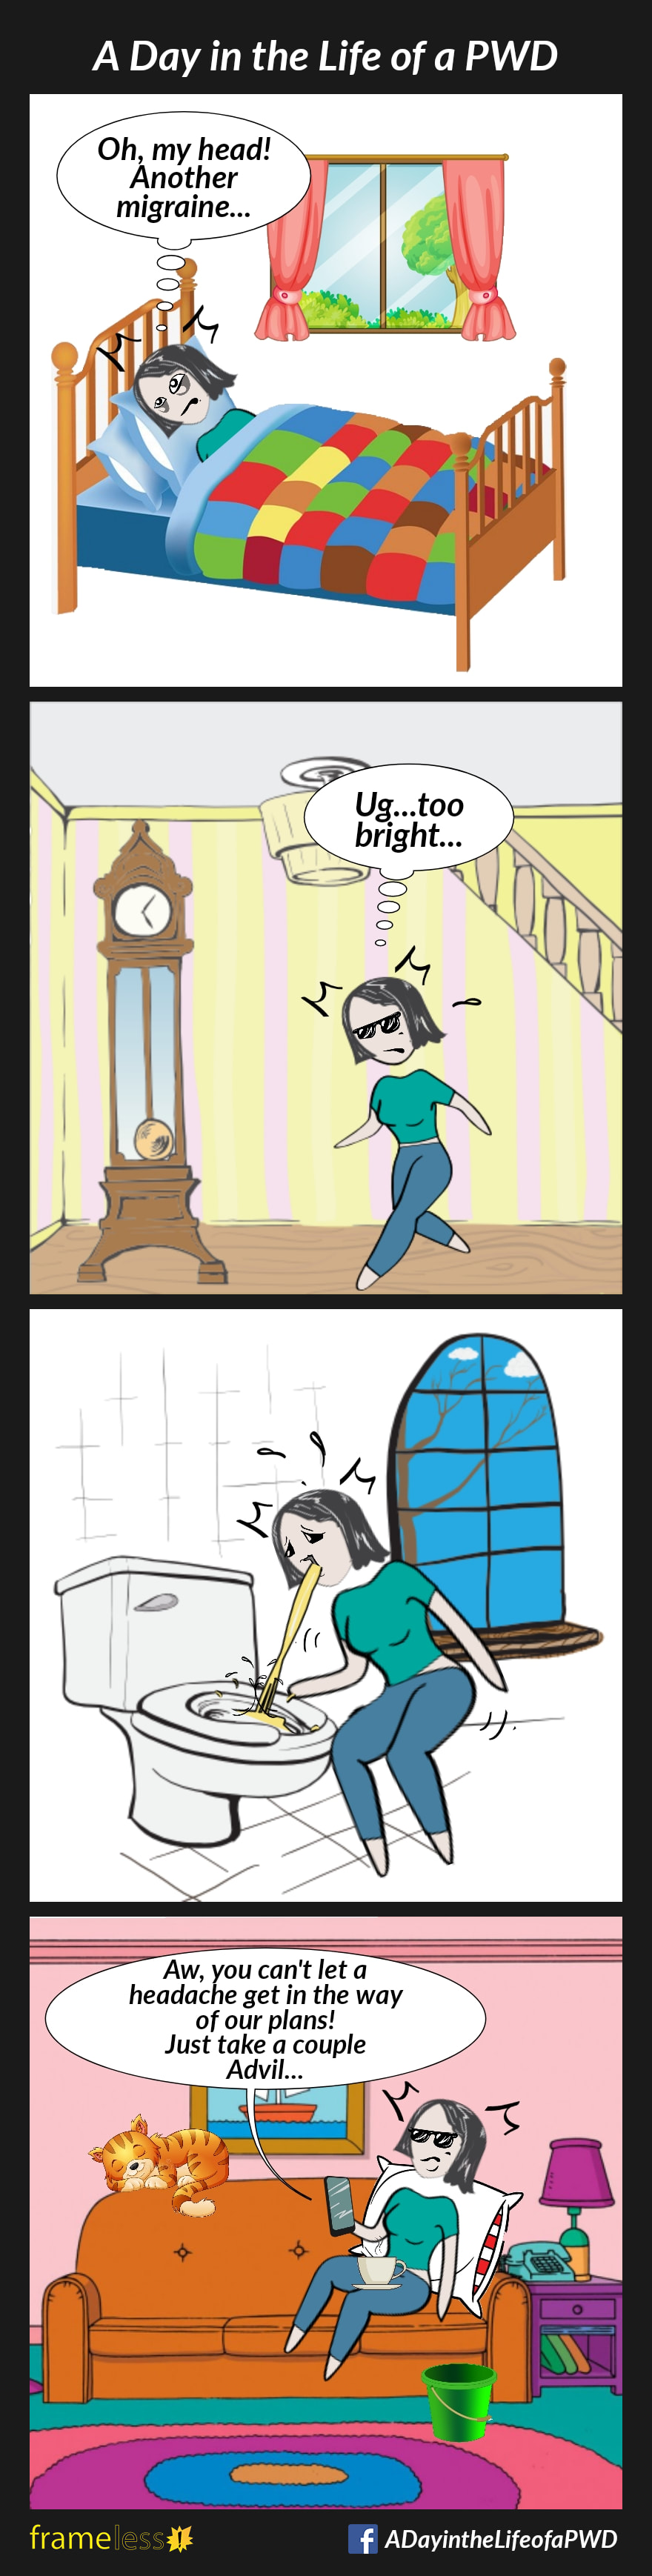 COMIC STRIP 
A Day in the Life of a PWD (Person With a Disability) 

Frame 1:
A woman wakes up in the morning, tired and in pain.
WOMAN: Oh, my head! Another migraine...

Frame 2:
The woman walks downstairs, wearing sunglasses.
WOMAN: Ug...too bright...

Frame 3:
The woman is in the bathroom, vomiting into the toilet.

Frame 4:
The woman is lying on the sofa with a cup of tea on her lap, and a bucket on the floor beside her. She is on the phone with a friend.
FRIEND: Aw, you can't let a headache get in the way of our plans! Just take a couple Advil...